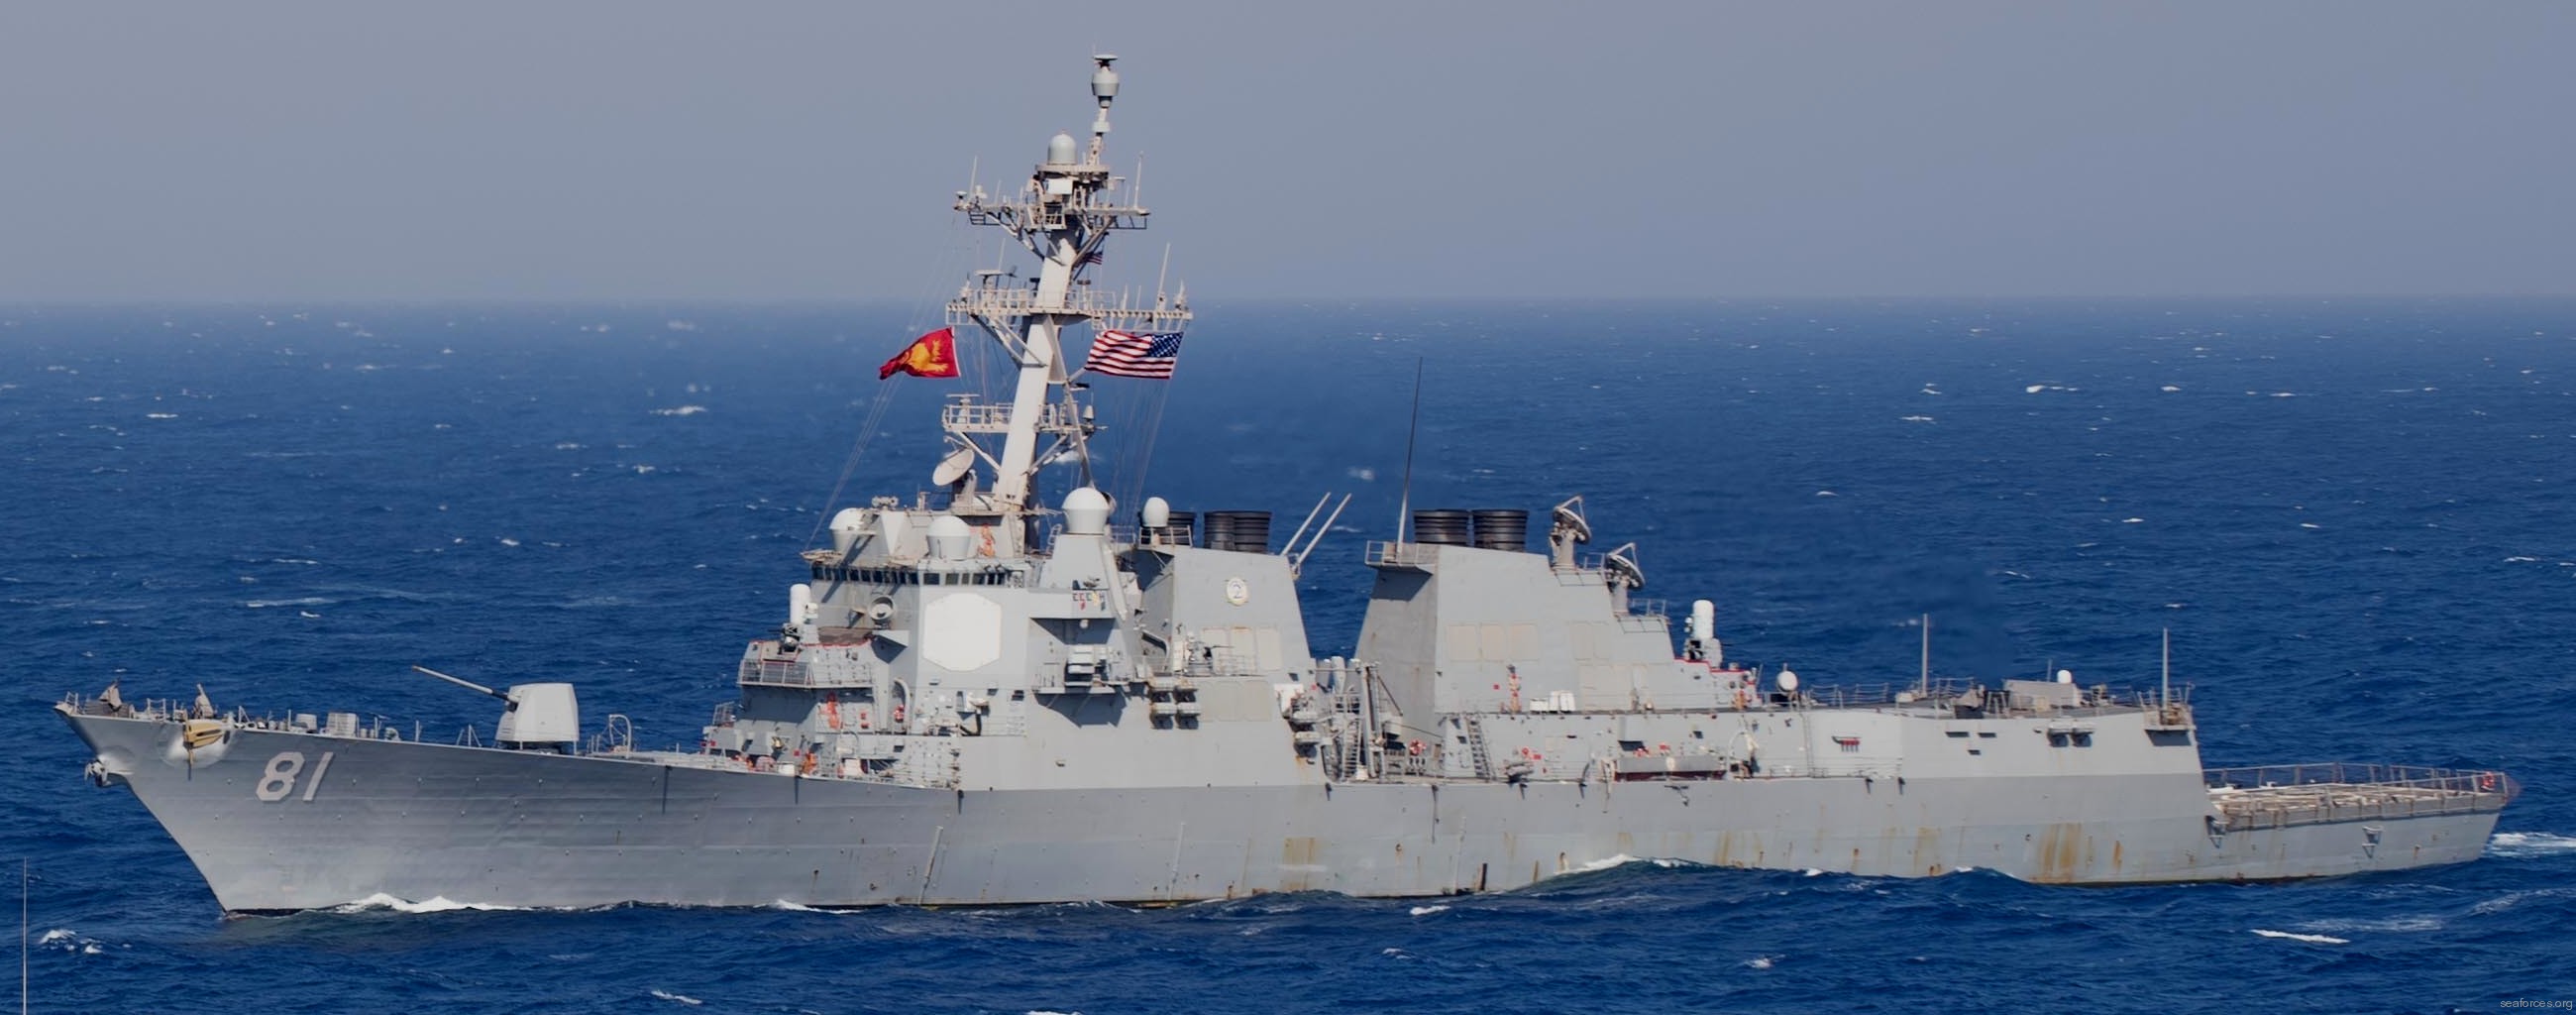 ddg-81 uss winston s. churchill arleigh burke class guided missile destroyer aegis 12 red sea